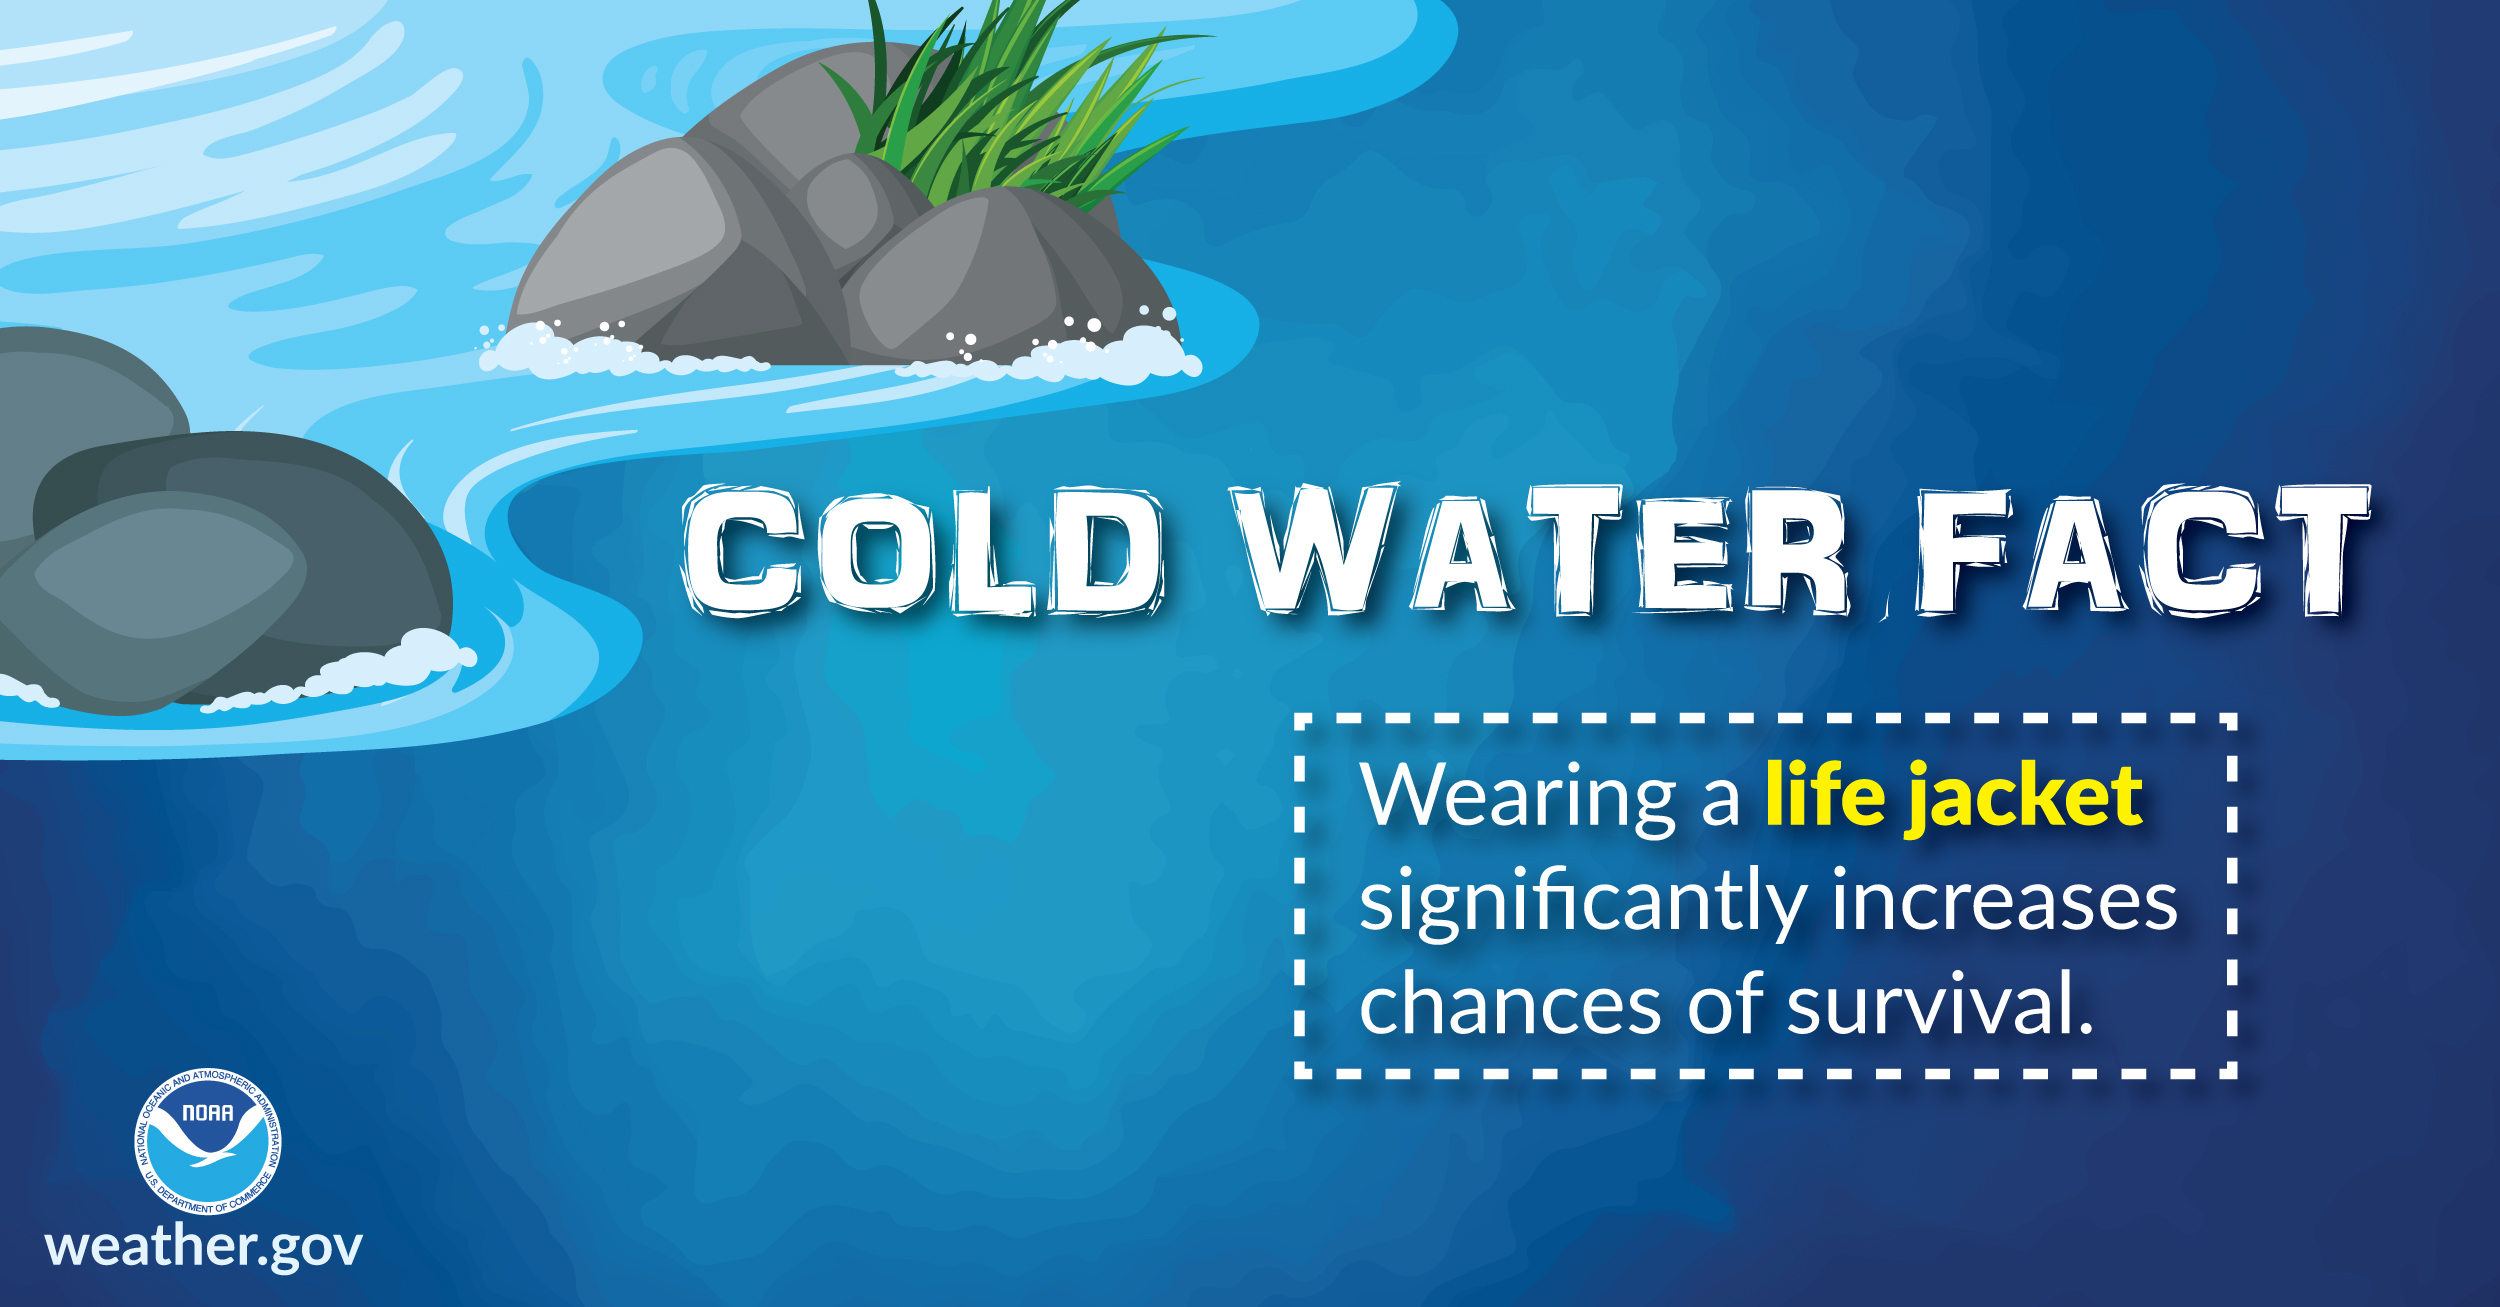 Cold Water Fact: wearing a life jacket significantly increases chances of survival.